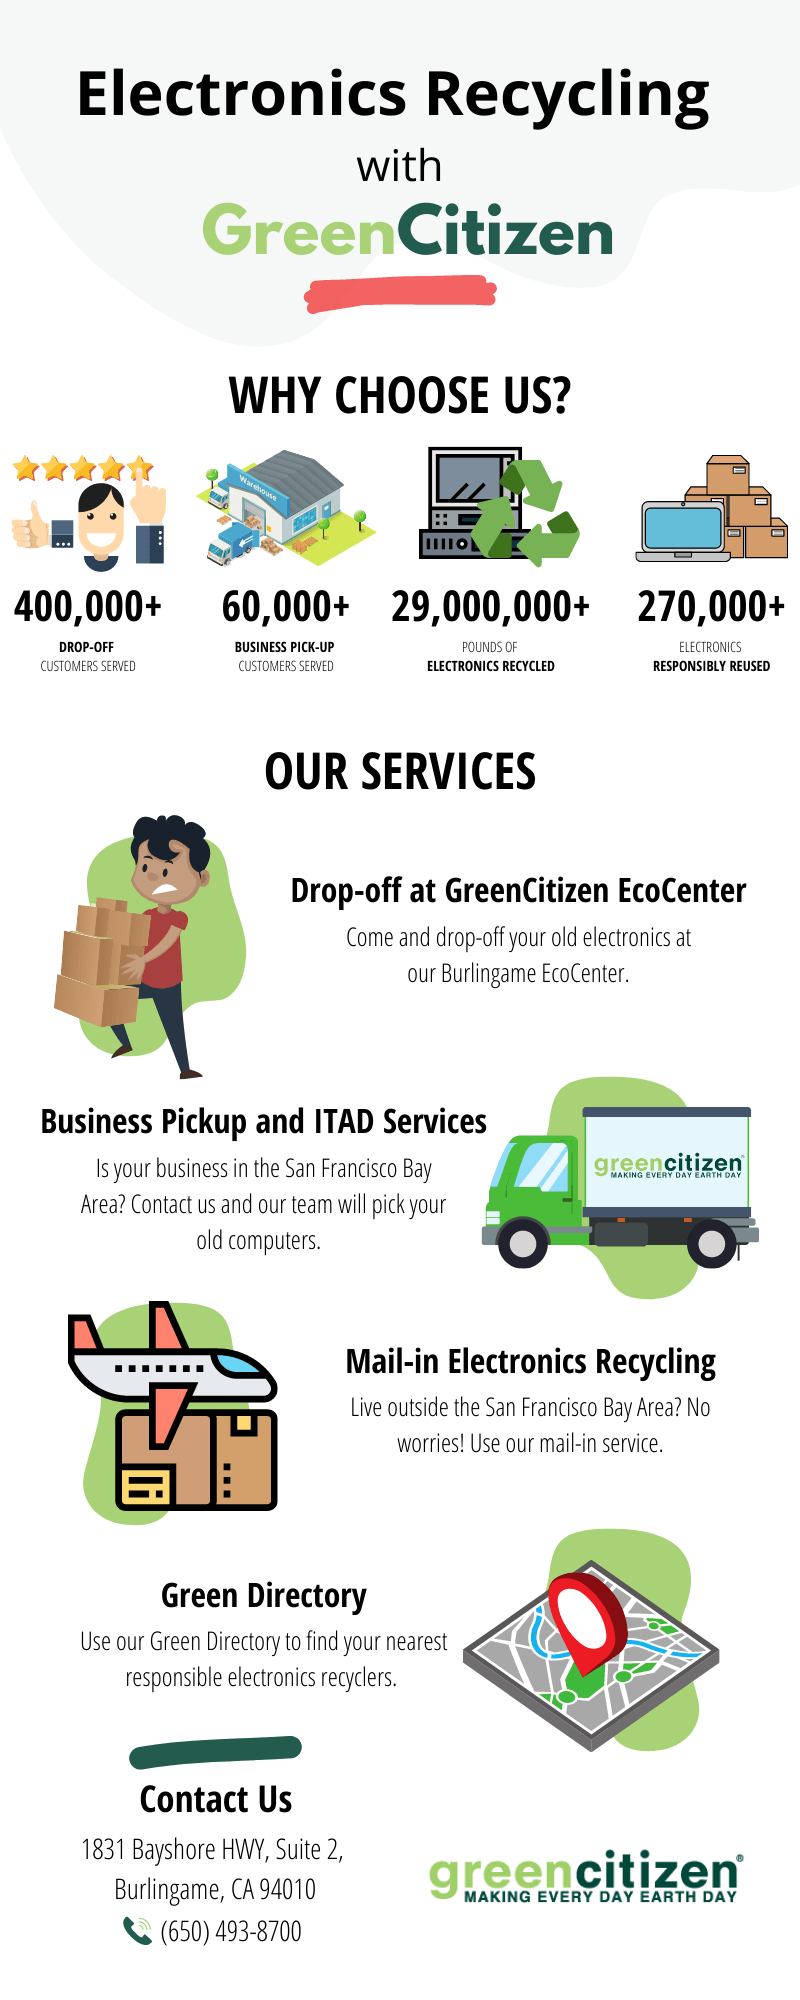 Electronics Recycling with GreenCitizen